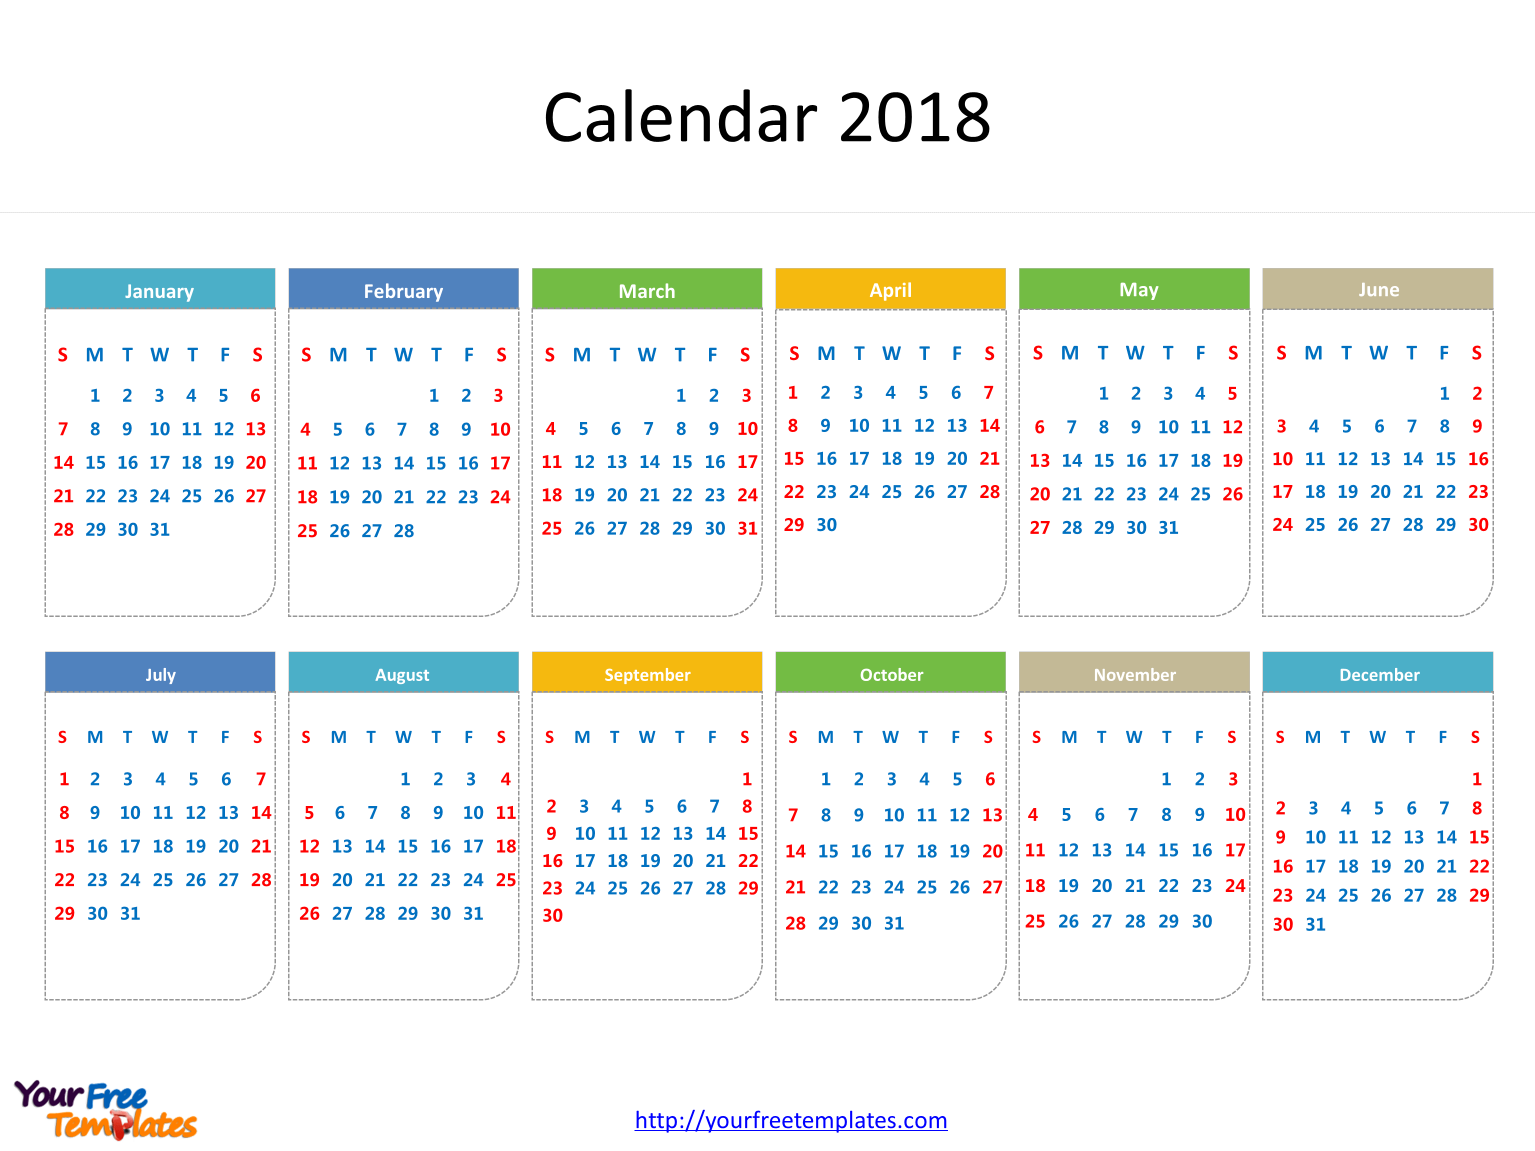 printable calendar 2018 with every date in it